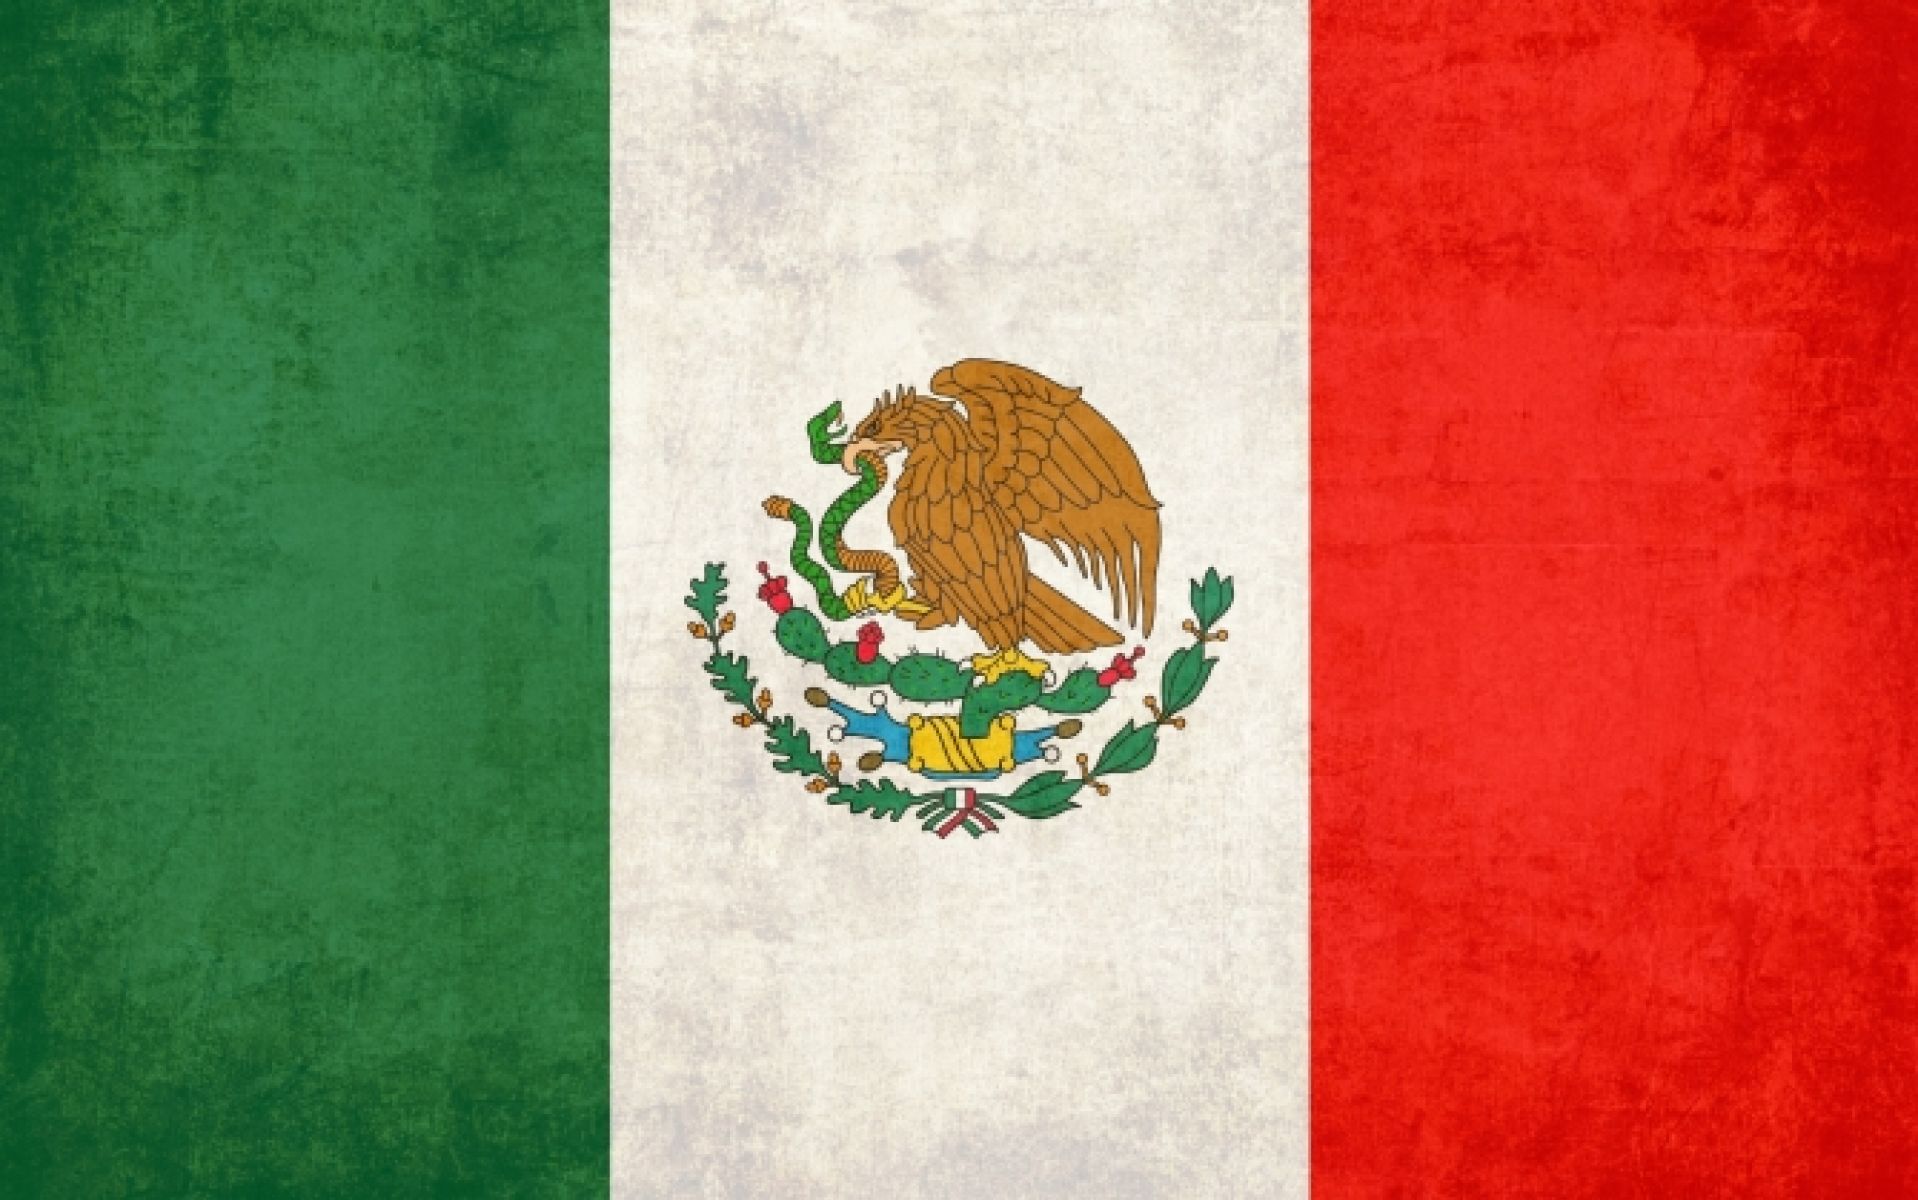 My Country MEXICO: Hand-Painted Band for Apple Watch Inspired by NATIONAL FLAG of Mexico